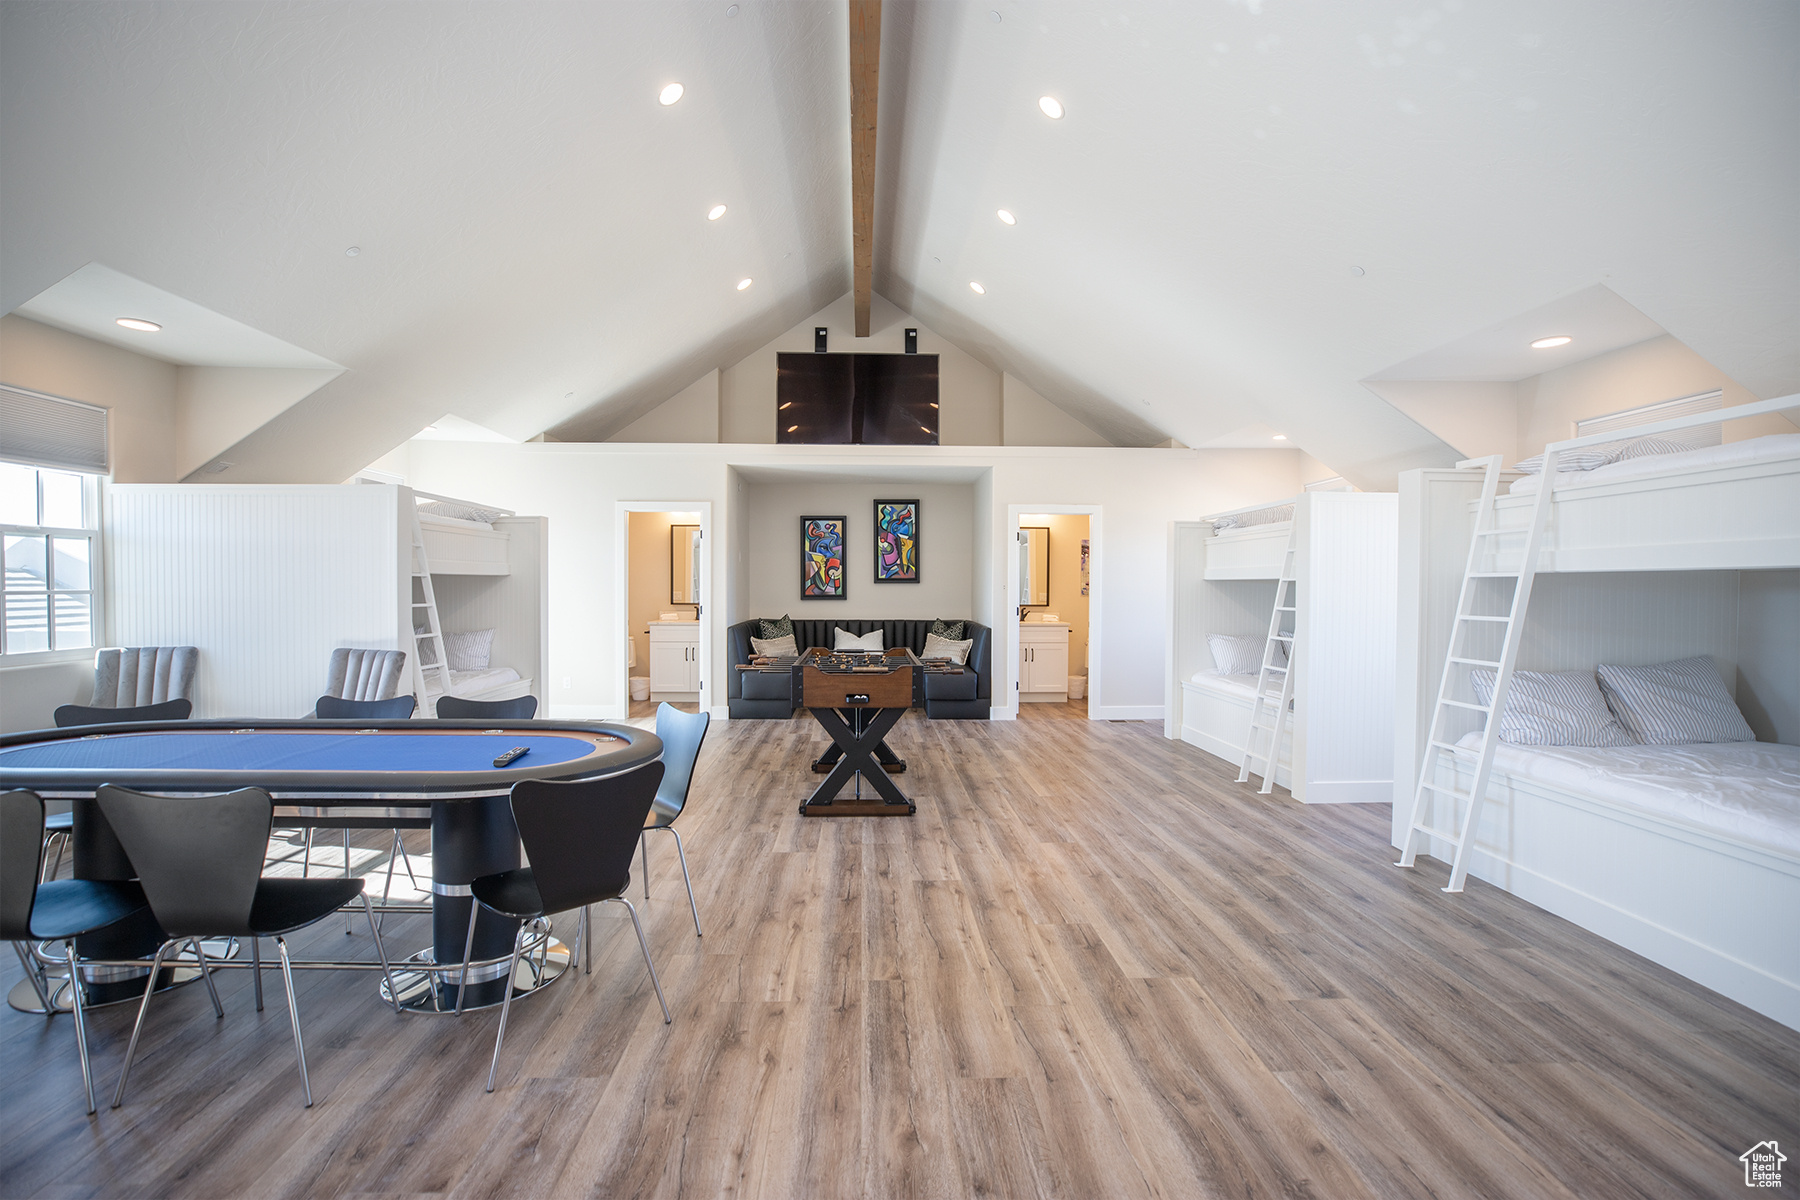 Rec room with light hardwood / wood-style floors, beamed ceiling, and high vaulted ceiling